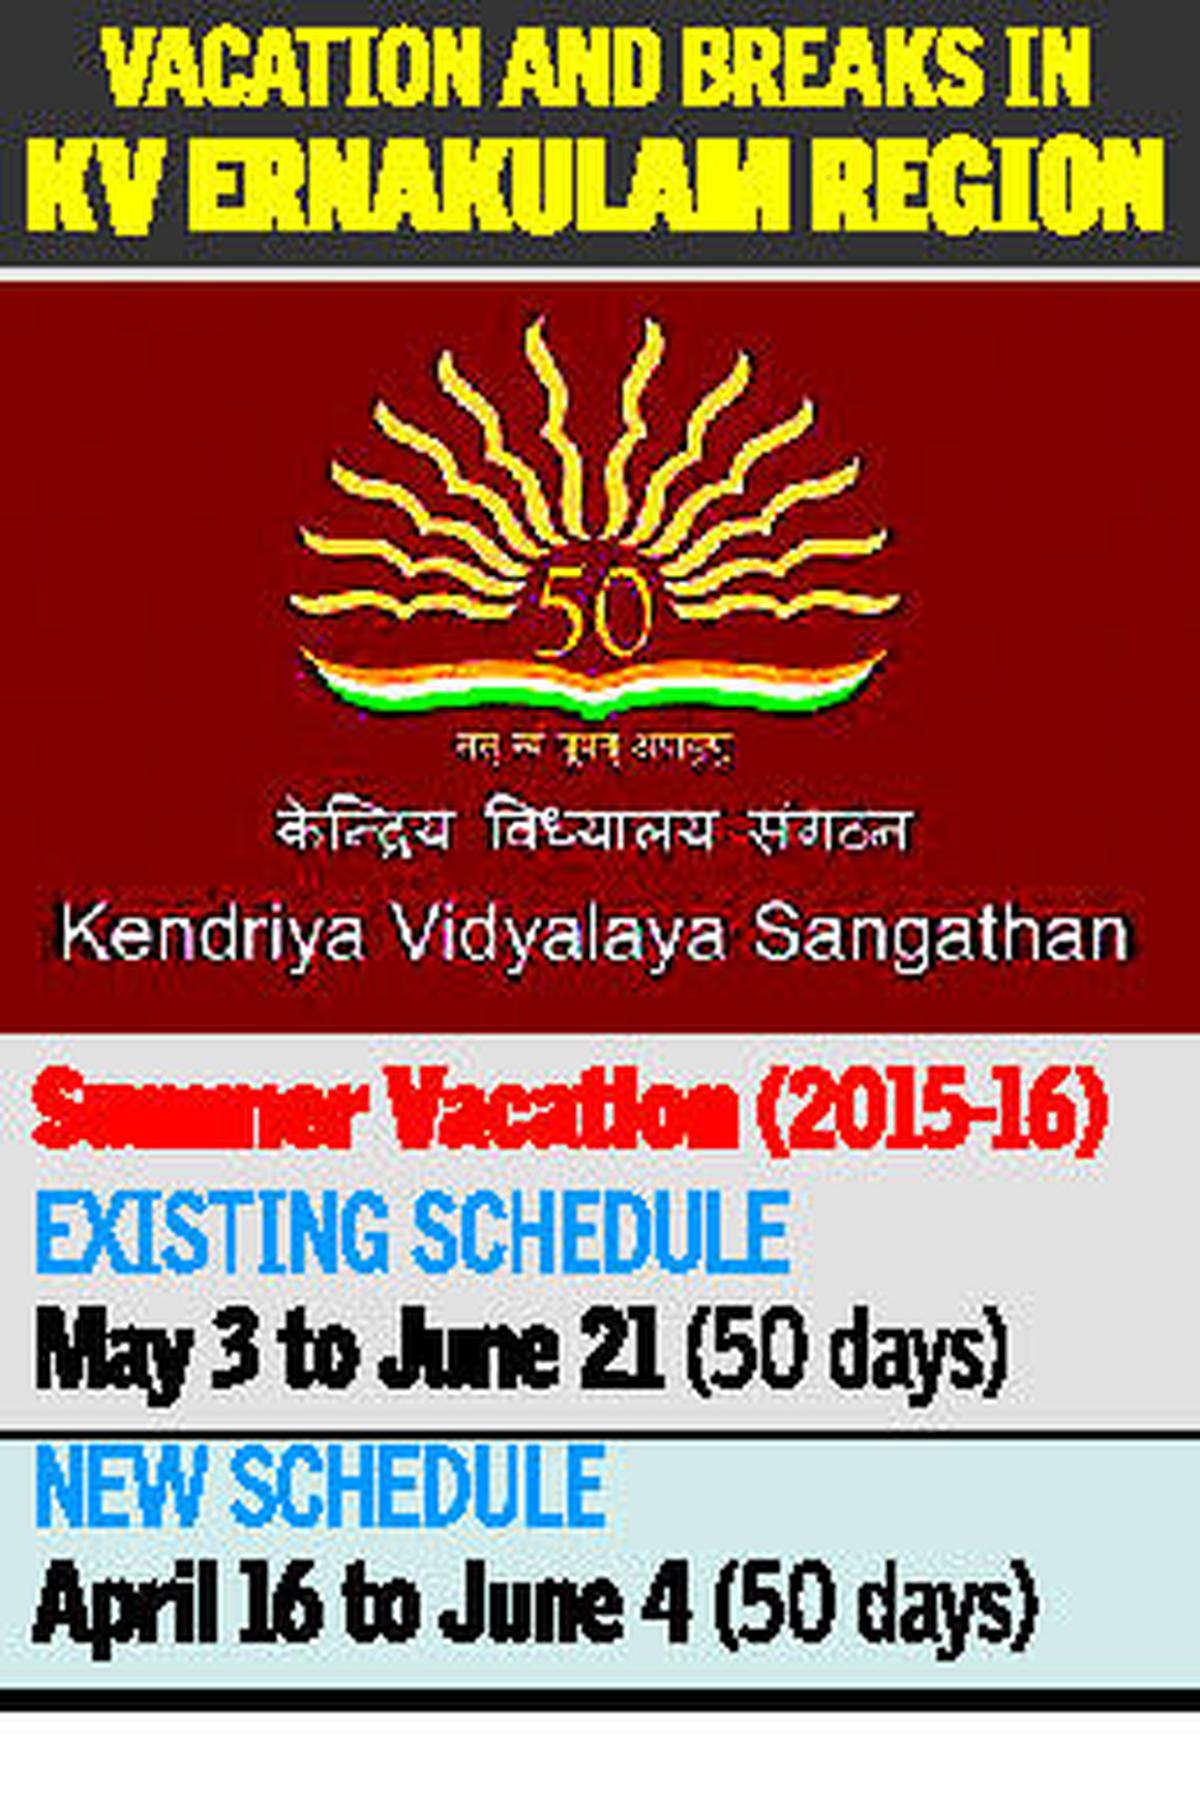 KVS recruitment: Registrations for 6,990 teaching and non-teaching posts  opens today